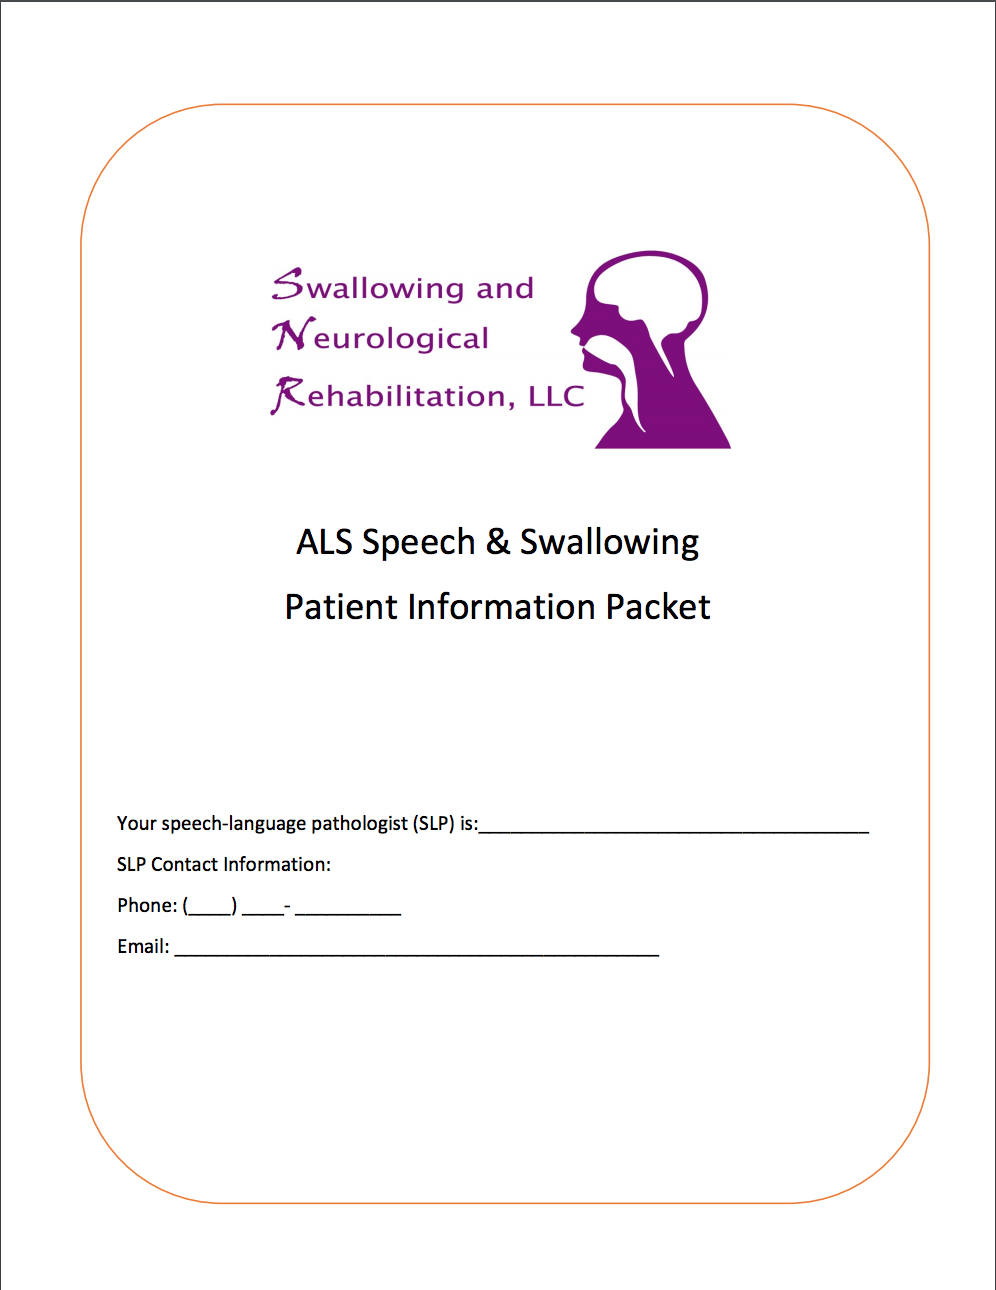 ALS Speech and Swallowing Patient Information Packet